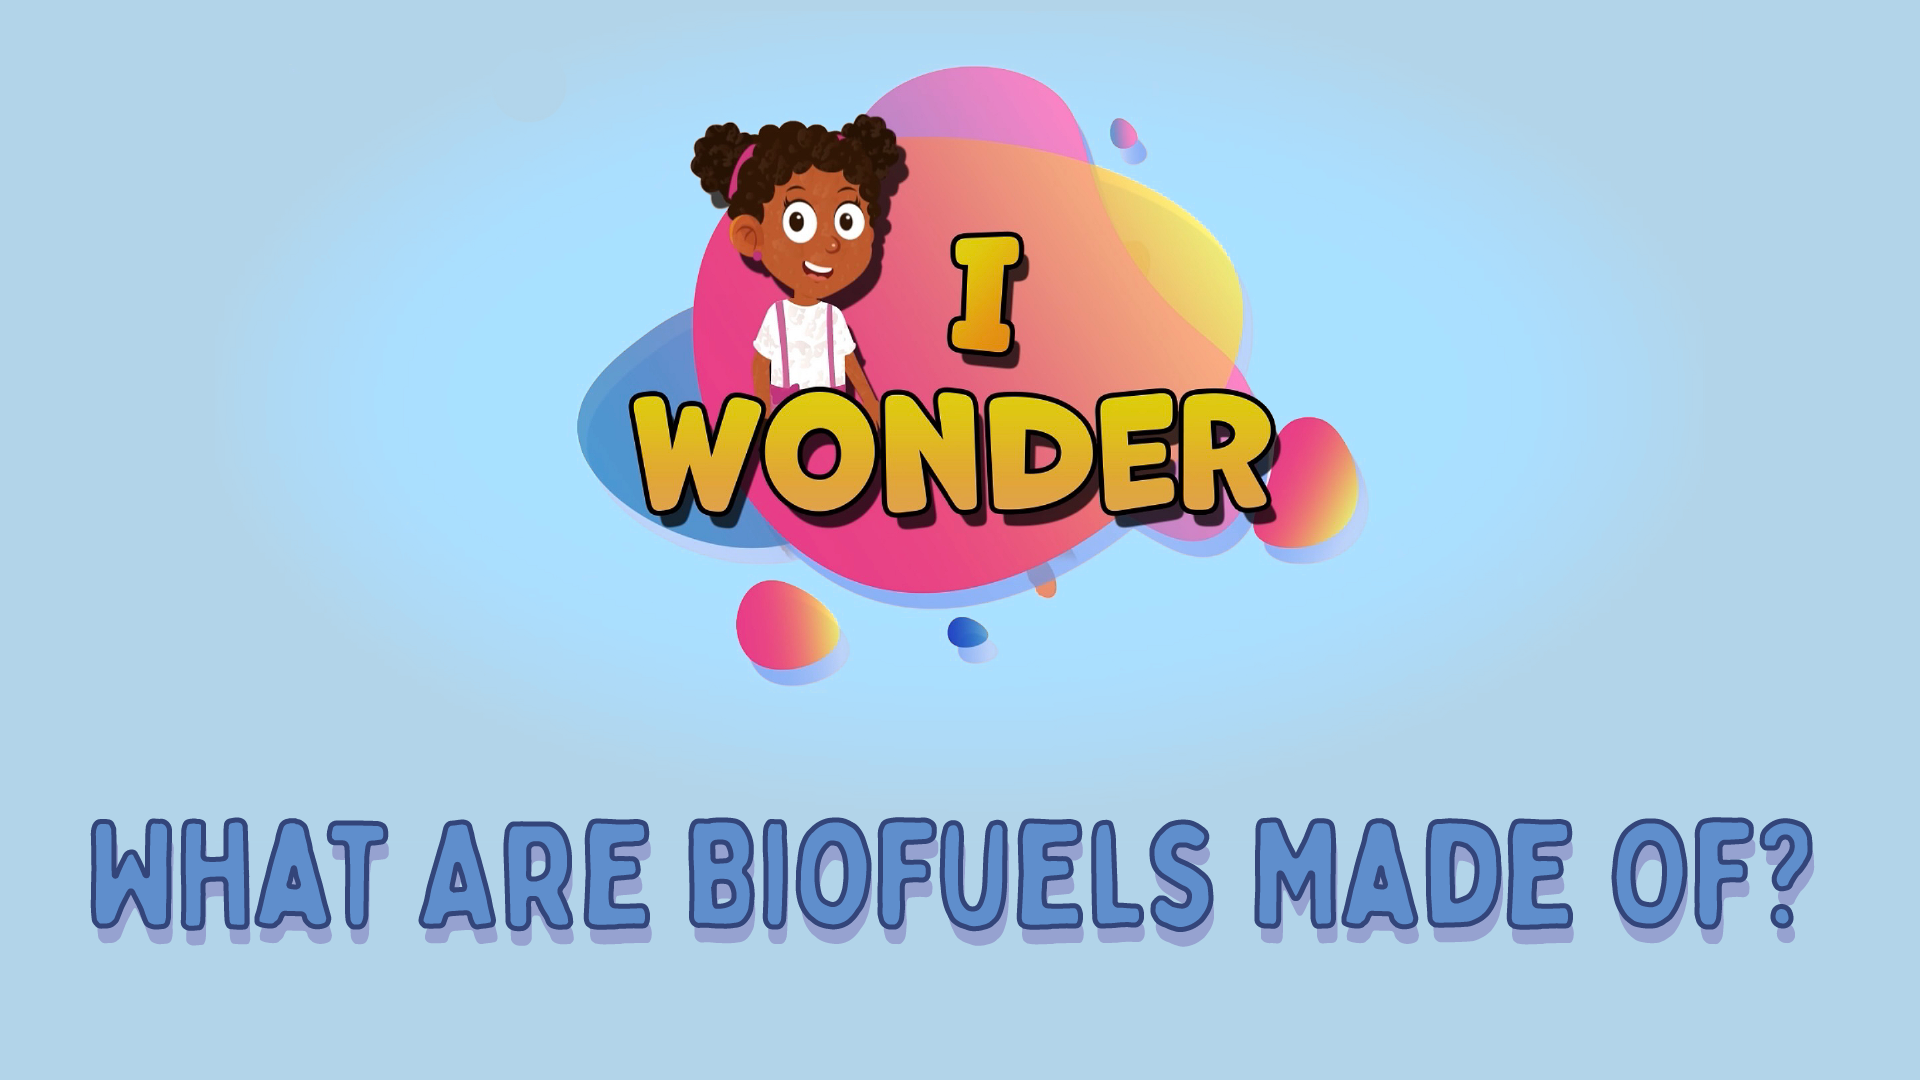 What Are Biofuels Made Of?